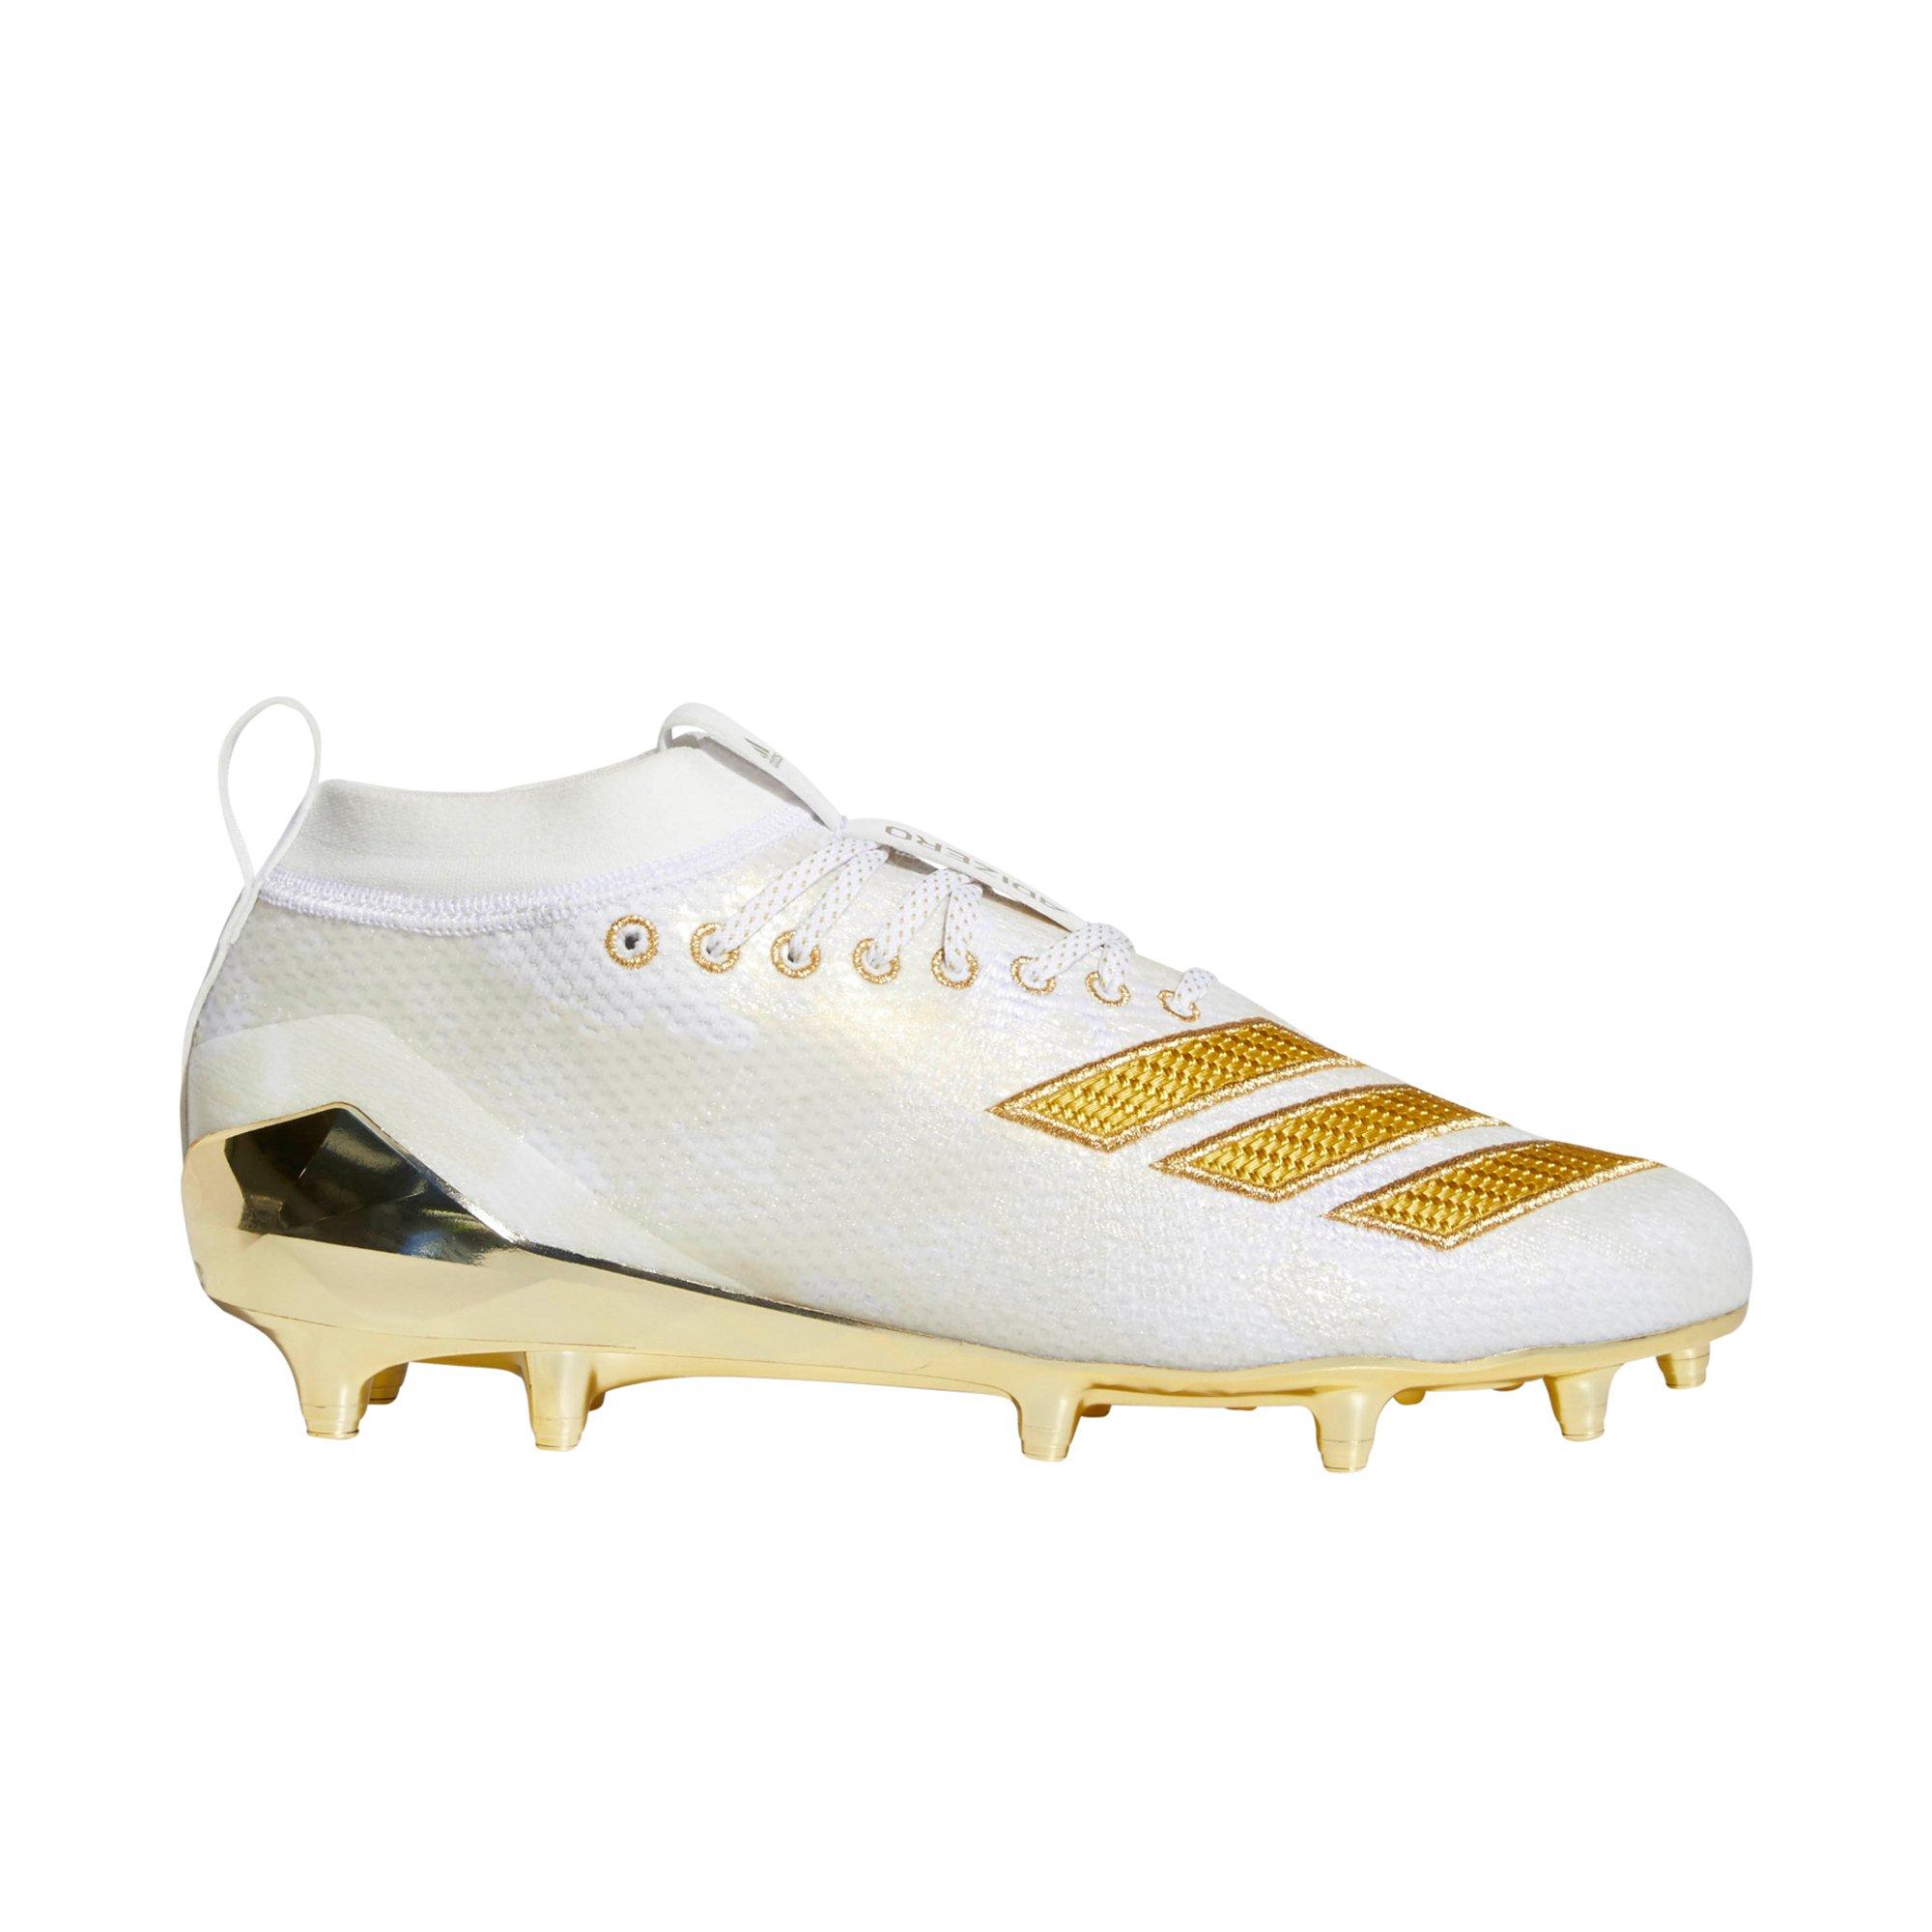 adidas all gold football cleats